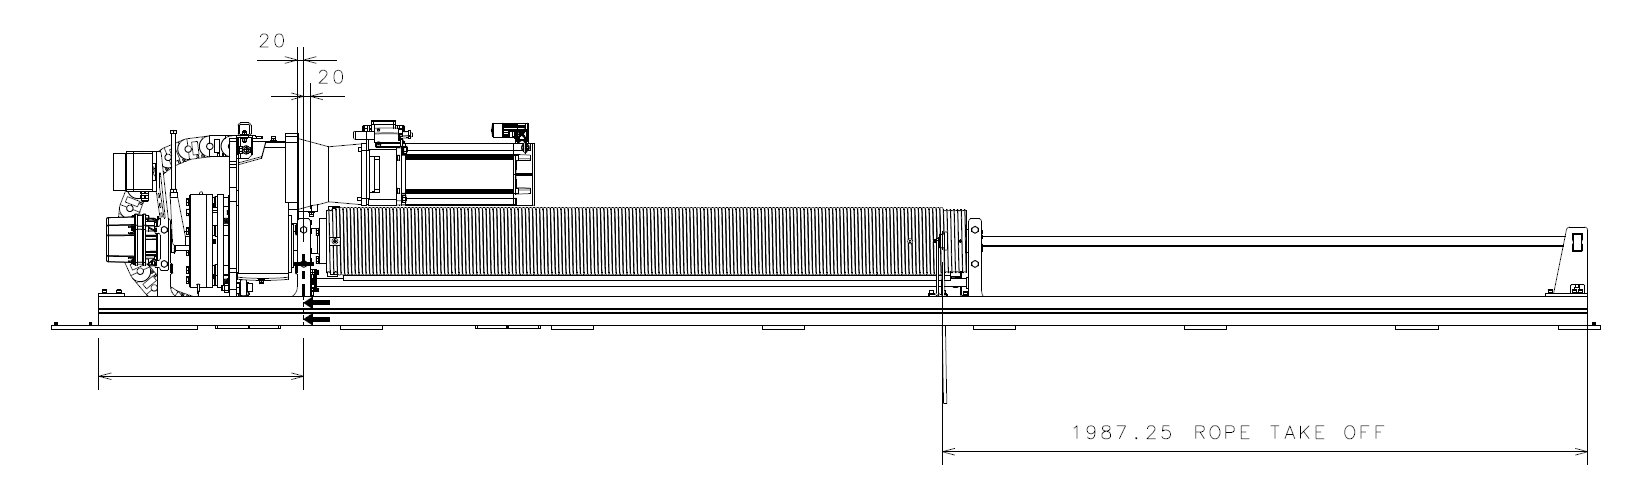 BT2-300-1_dim_5_front_view.png